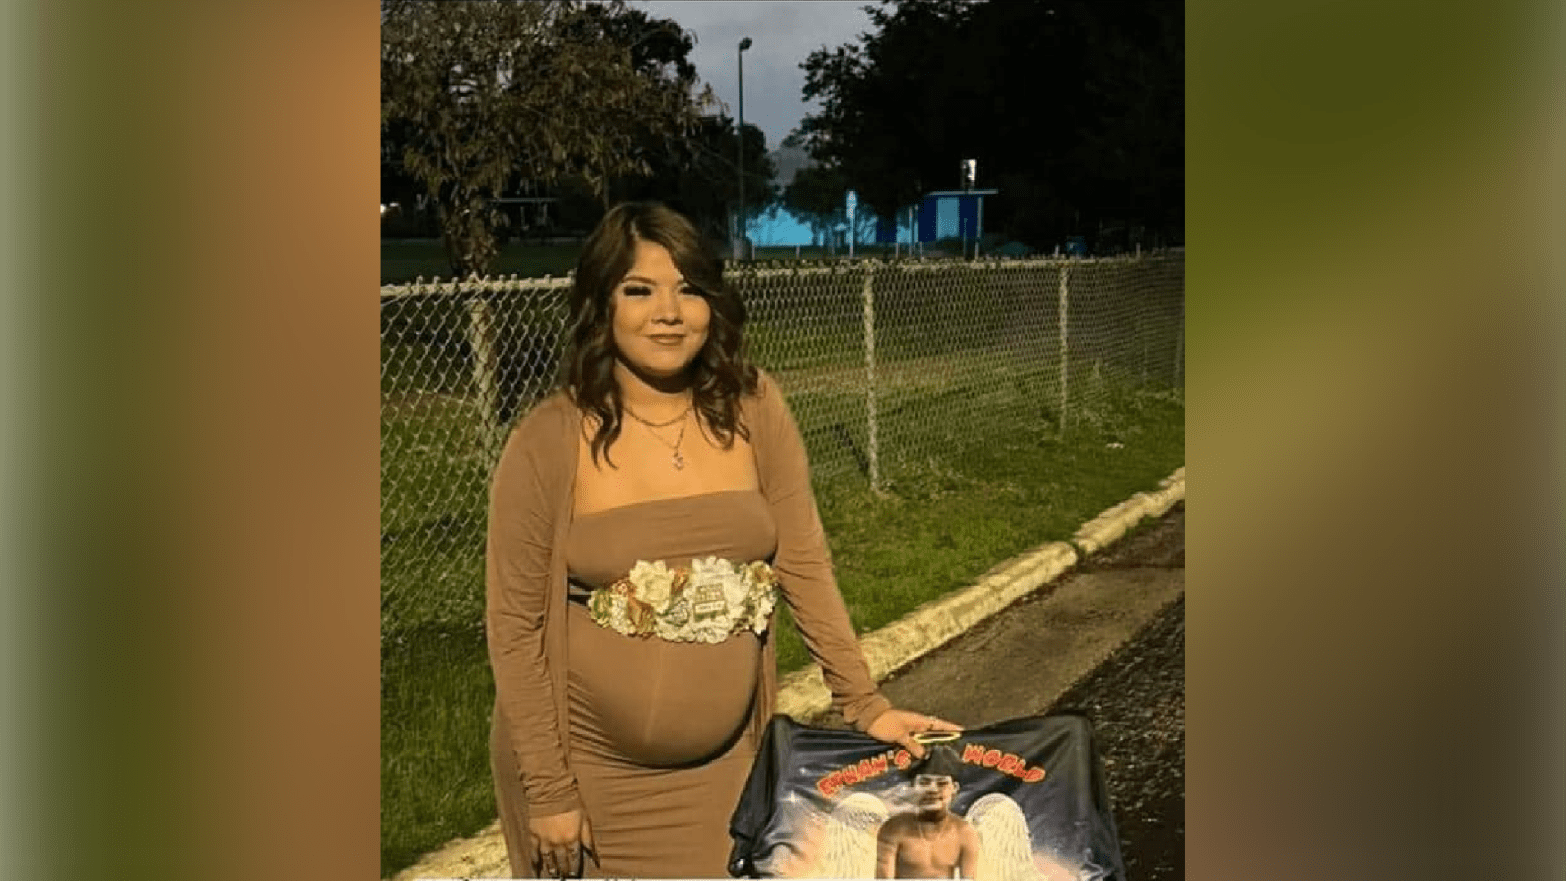 Pregnant Teen Savanah Nicole Soto Believed Dead After Disappearing In Texas Police Say